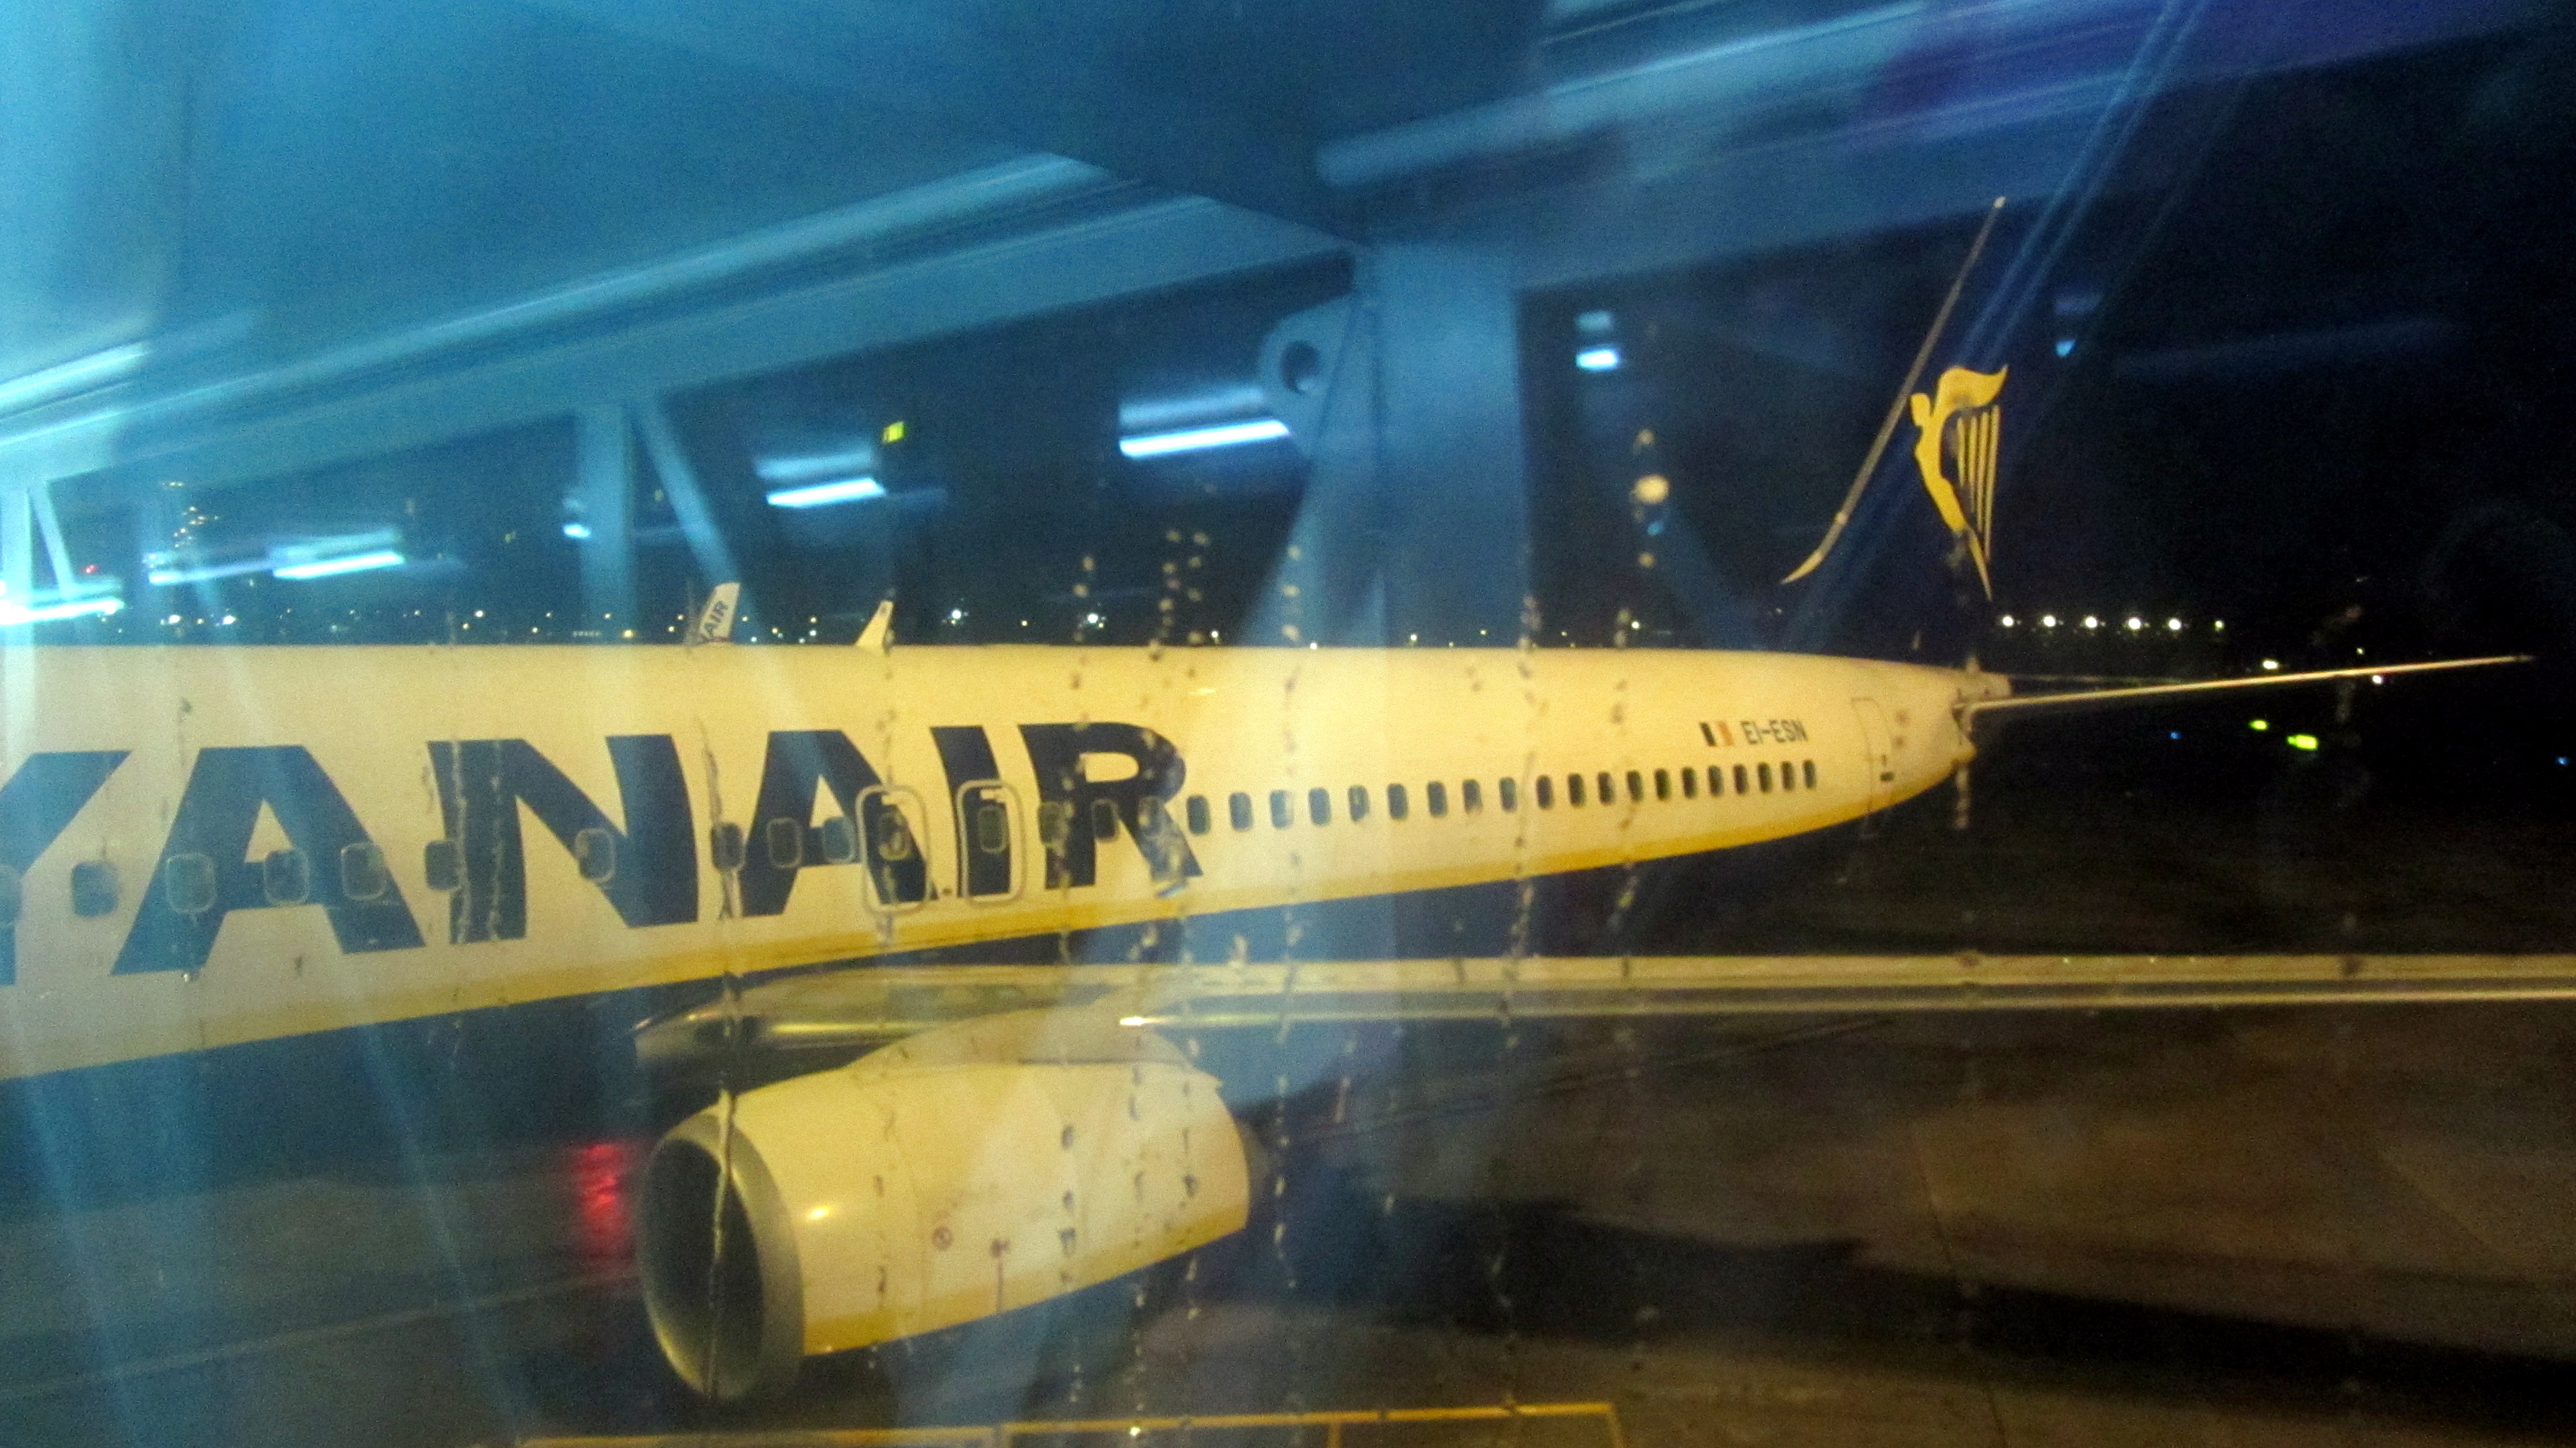 Arrival in Brussels at unusual gate for Ryanair: A/T 74 at the very end of Pier A. And disembarking through a jet bridge!